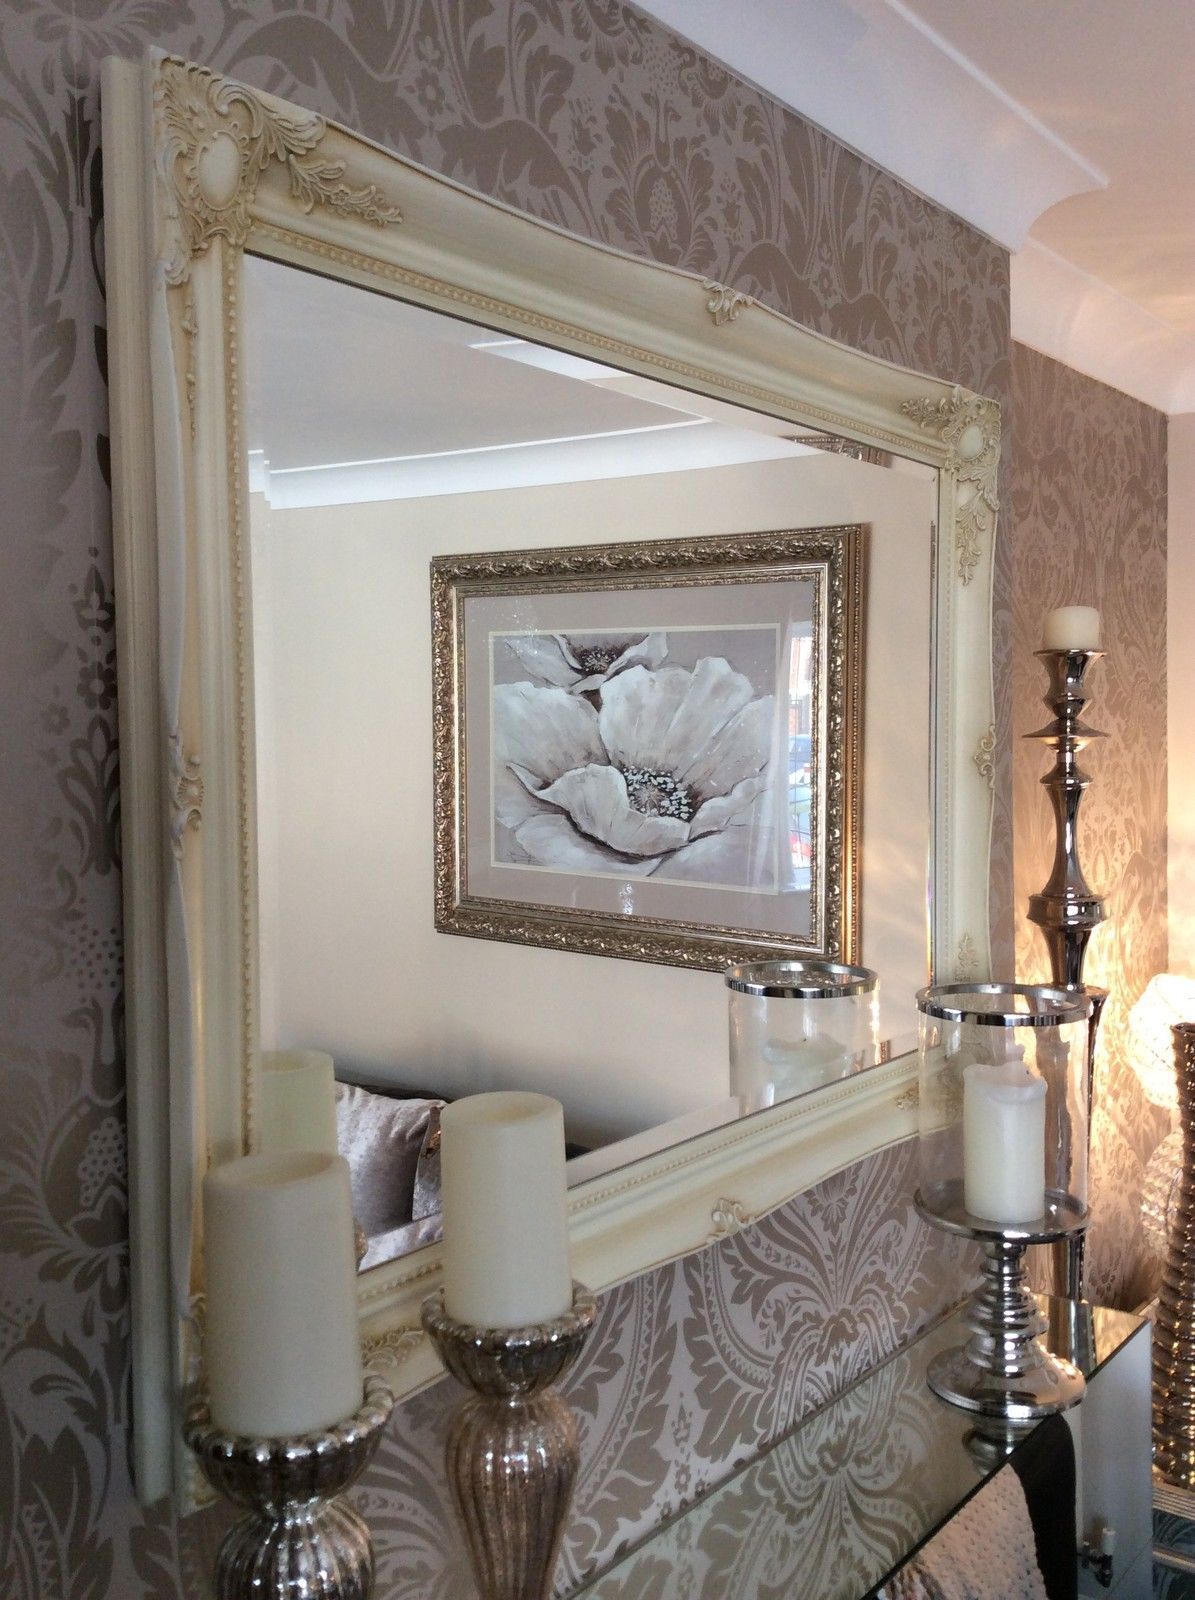 Huge Cream Shabby Chic Framed Ornate Wall Overmantle Mirror – Choose With Regard To Window Cream Wood Wall Mirrors (View 15 of 15)